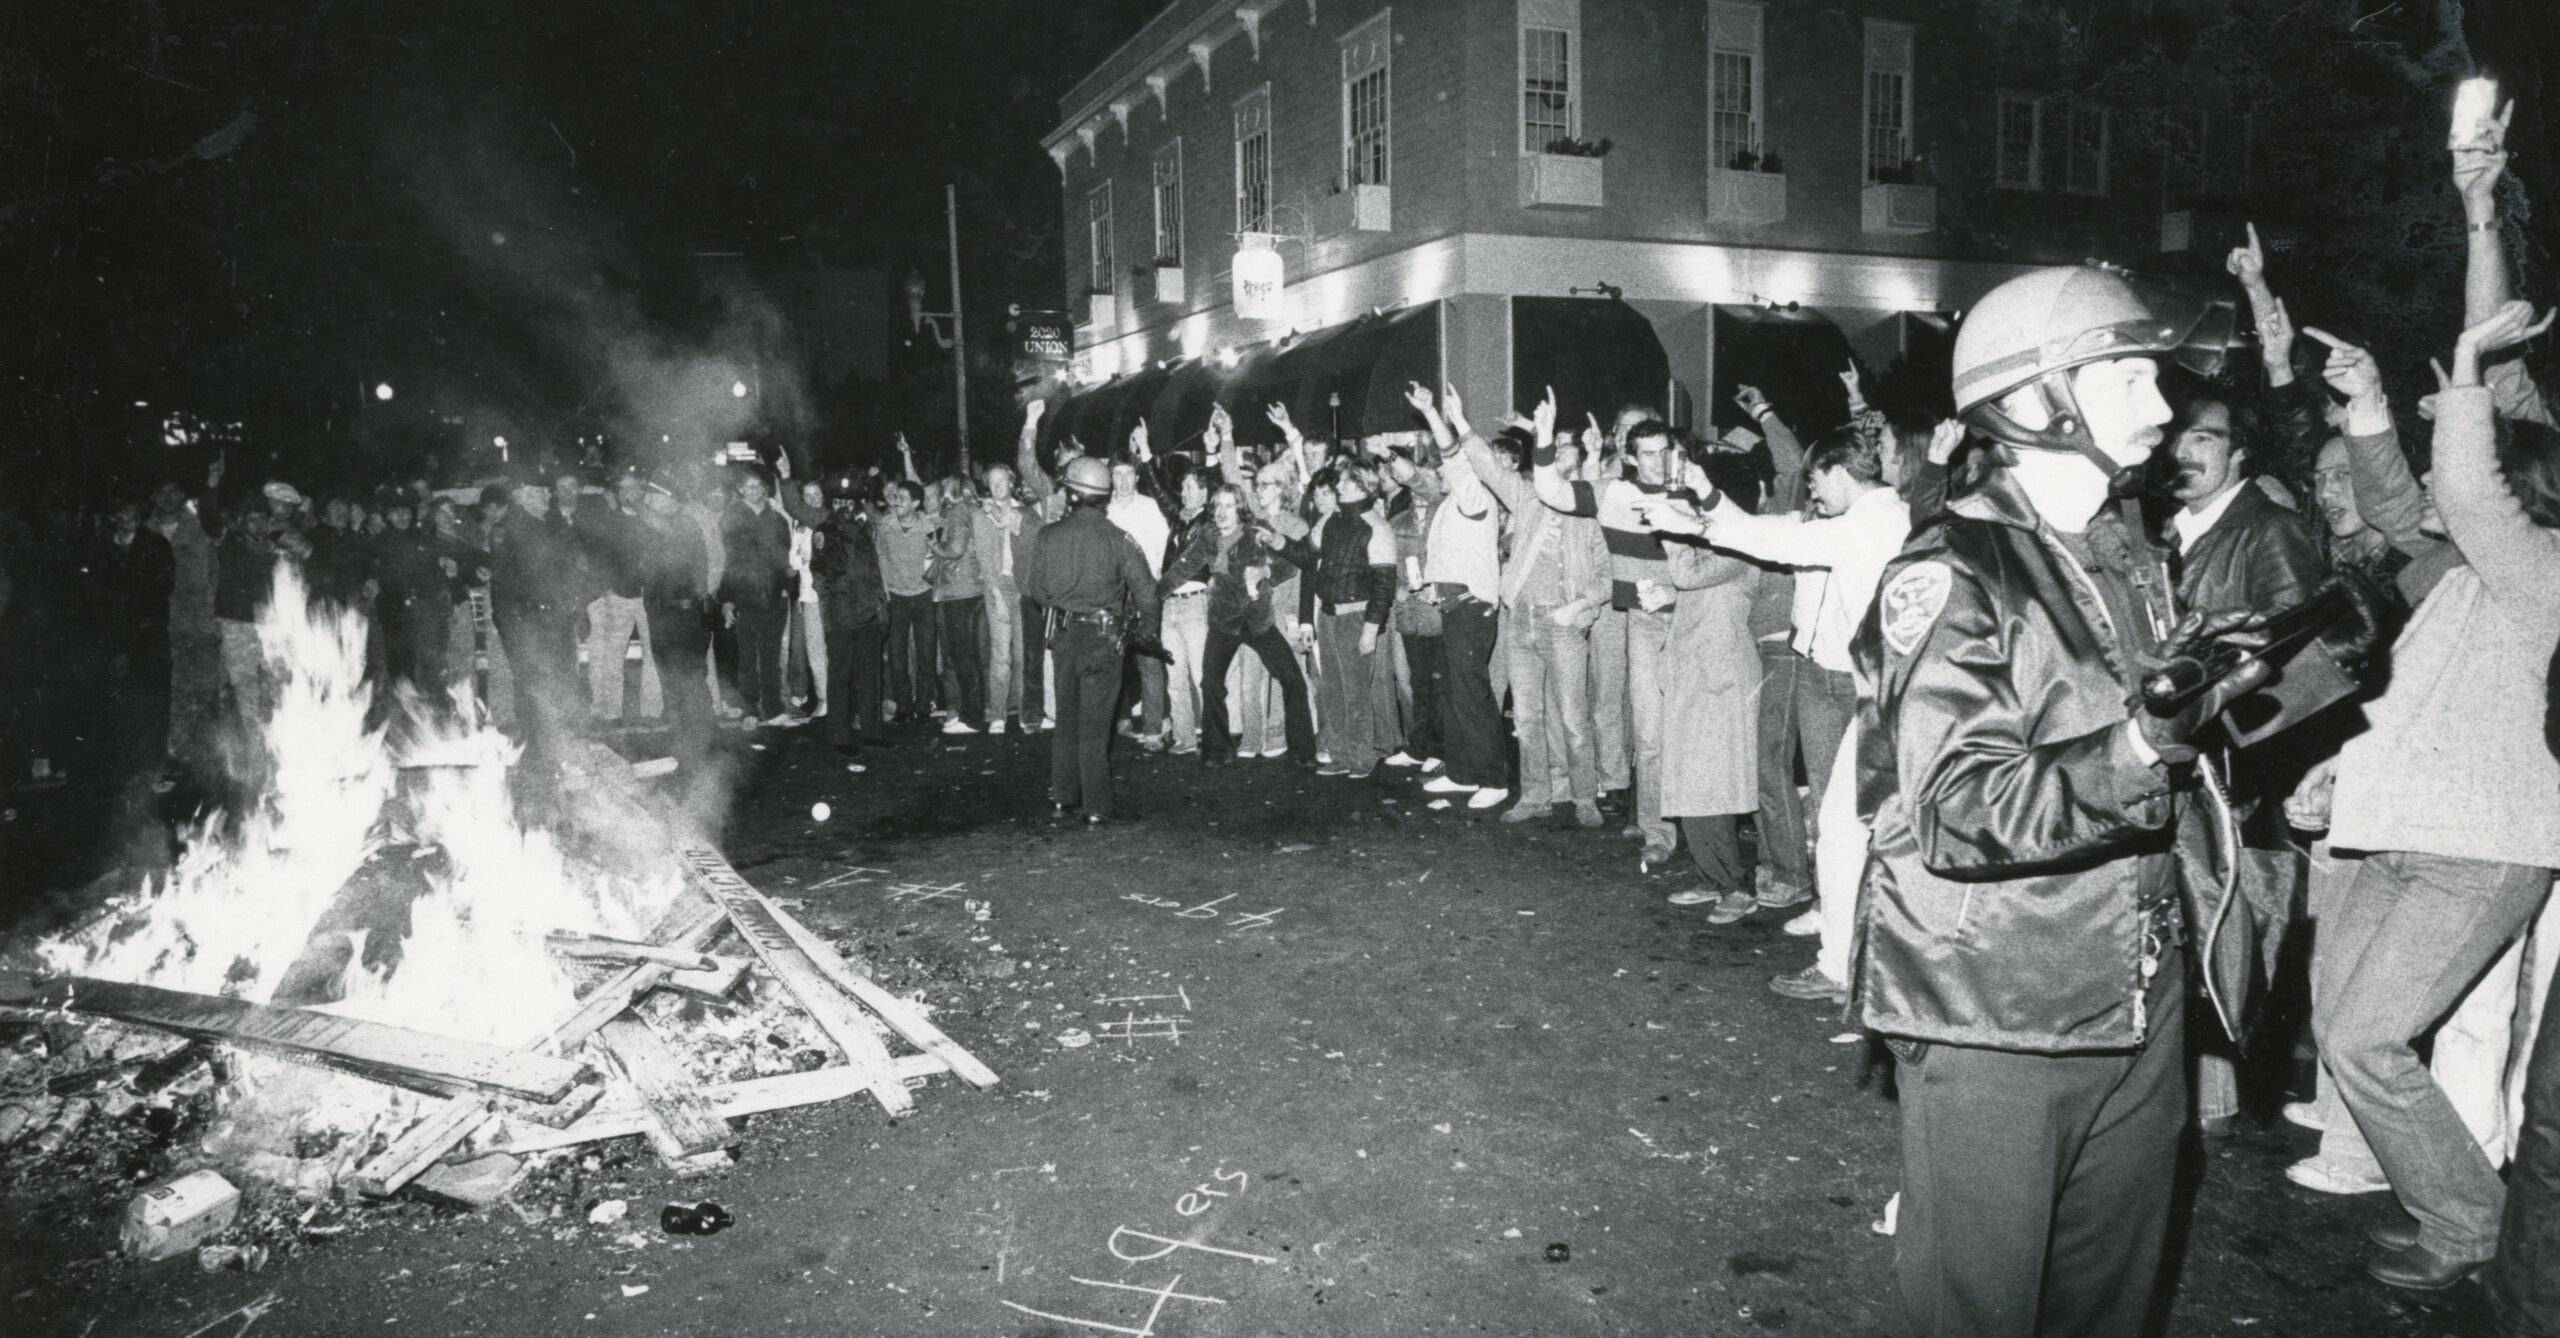 A bonfire at Union and Buchanan Sts. as fans celebrate the the 49ers Super Bowl win, January 24, 1982. | Eric Luse/San Francisco Chronicle via Getty Images